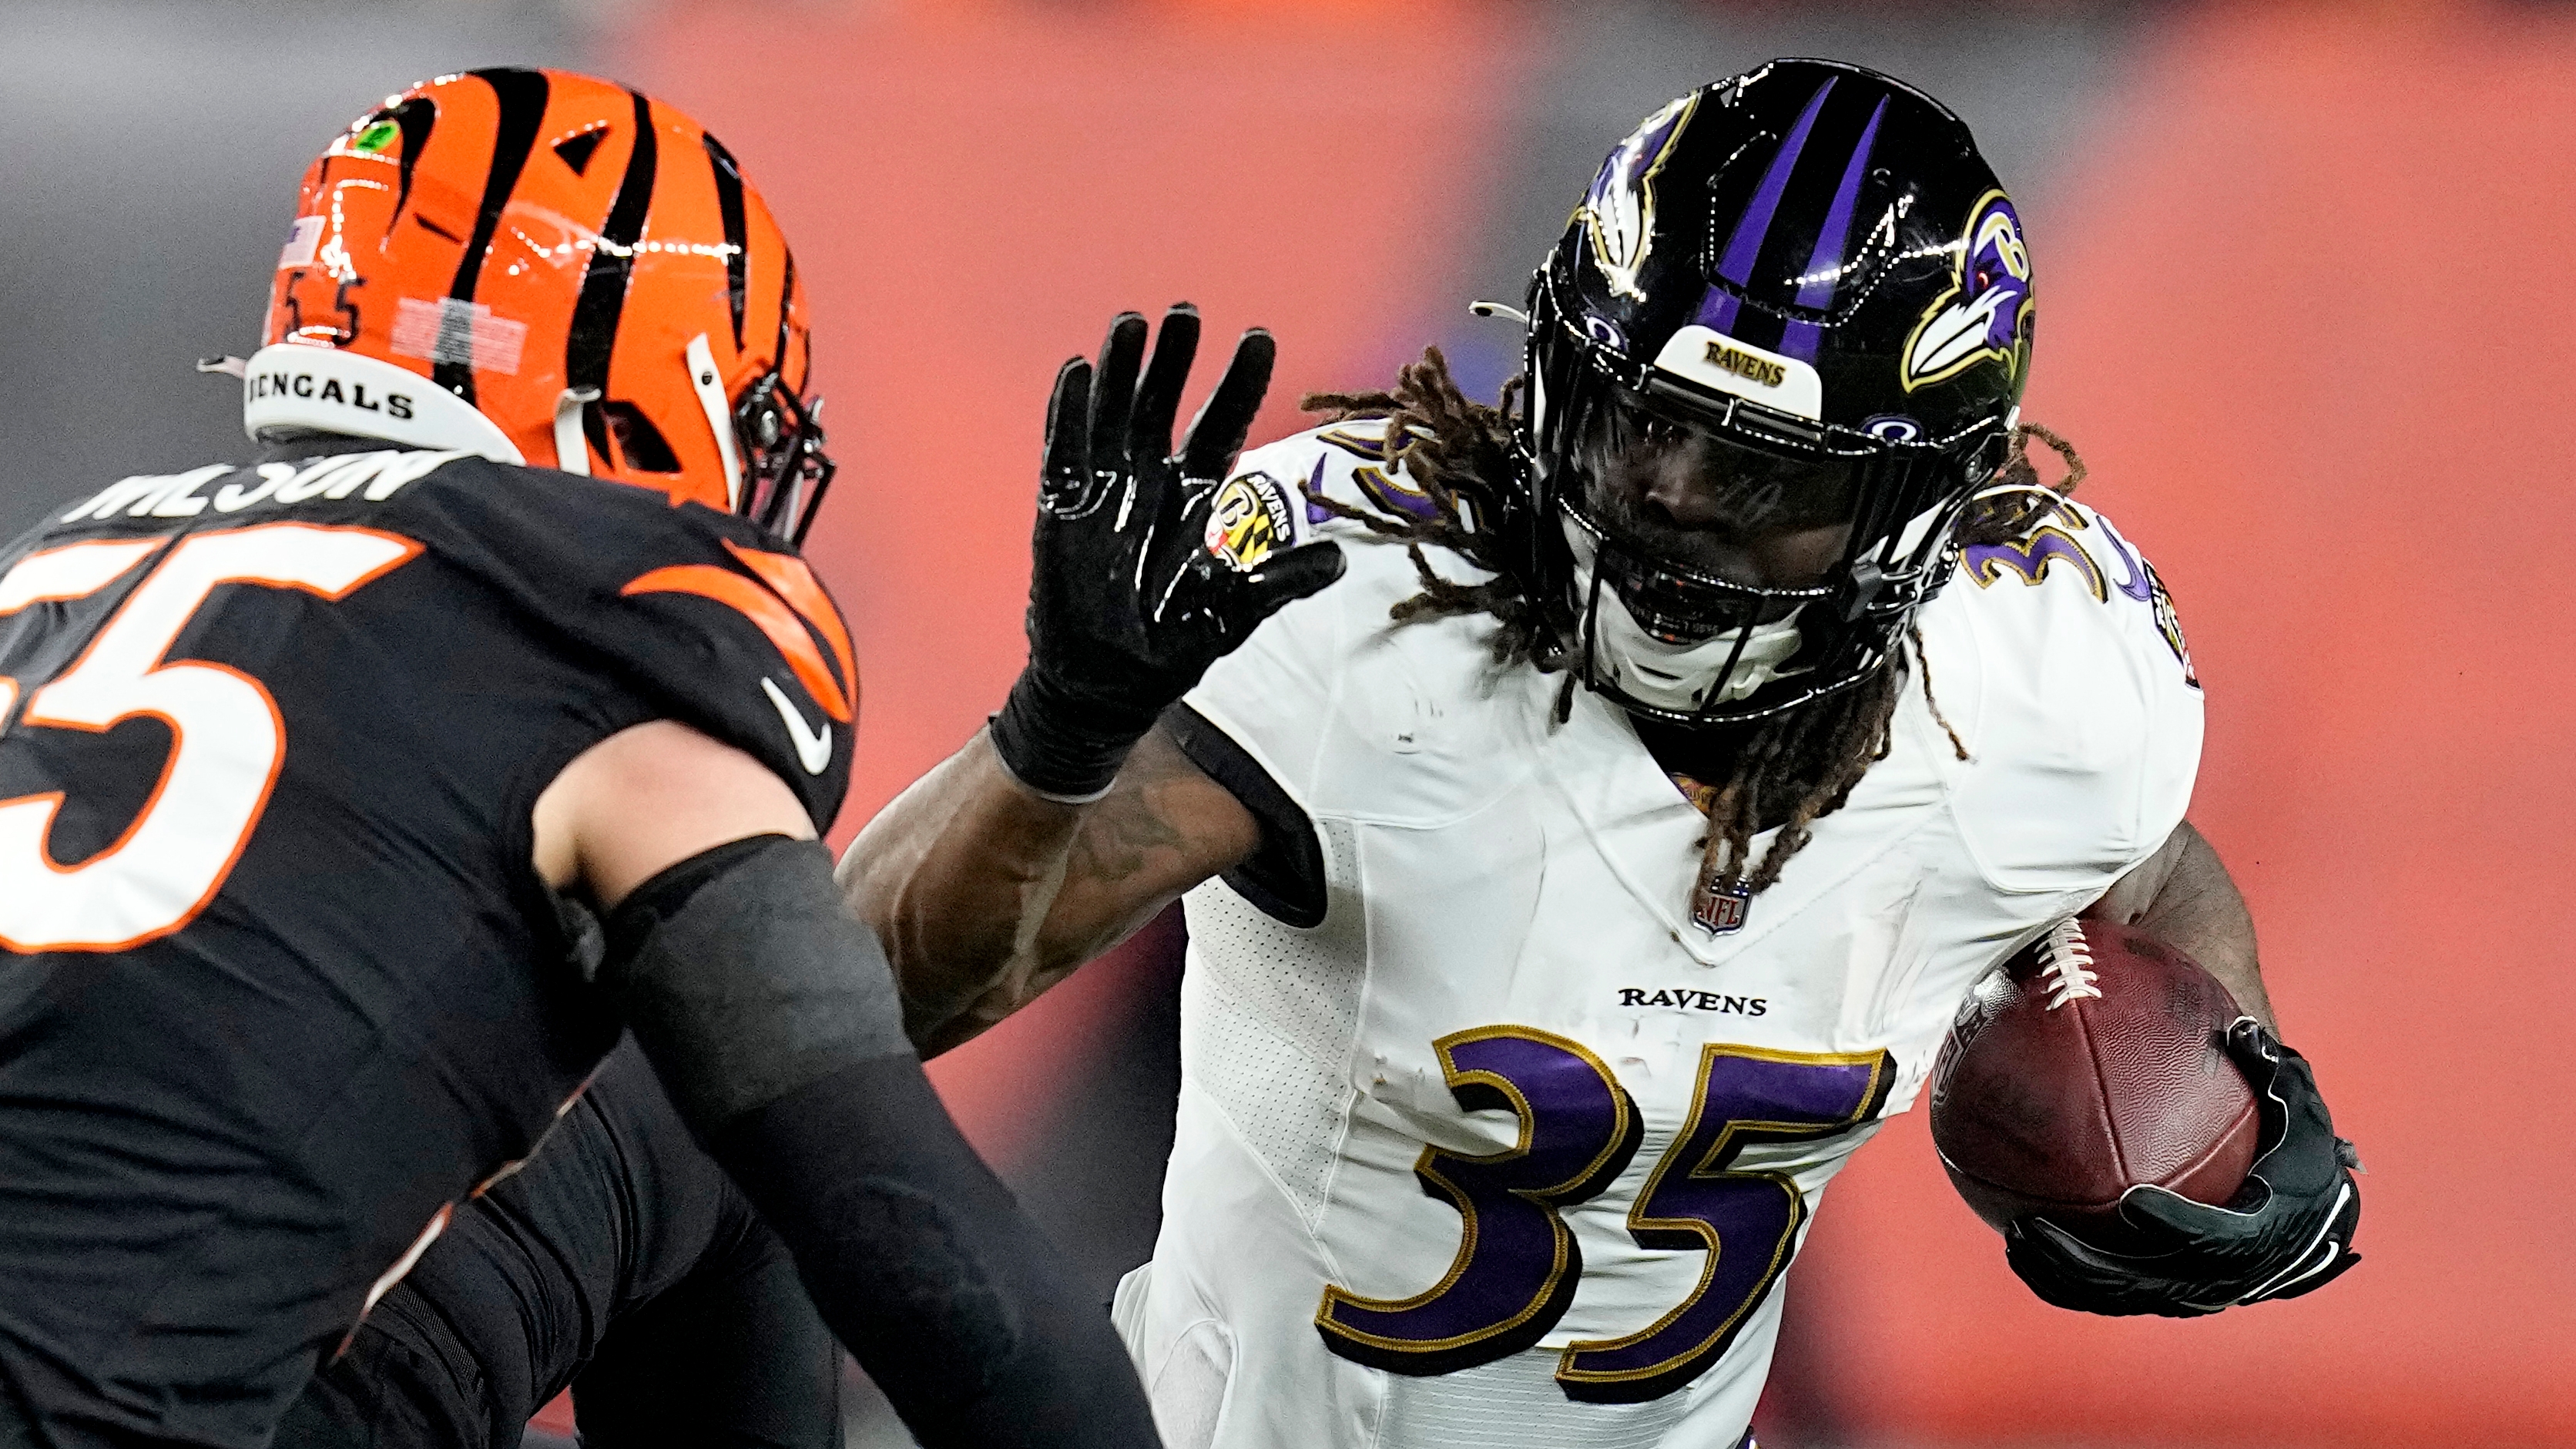 Ravens vs. Bengals scouting report for Week 2: Who has the edge?